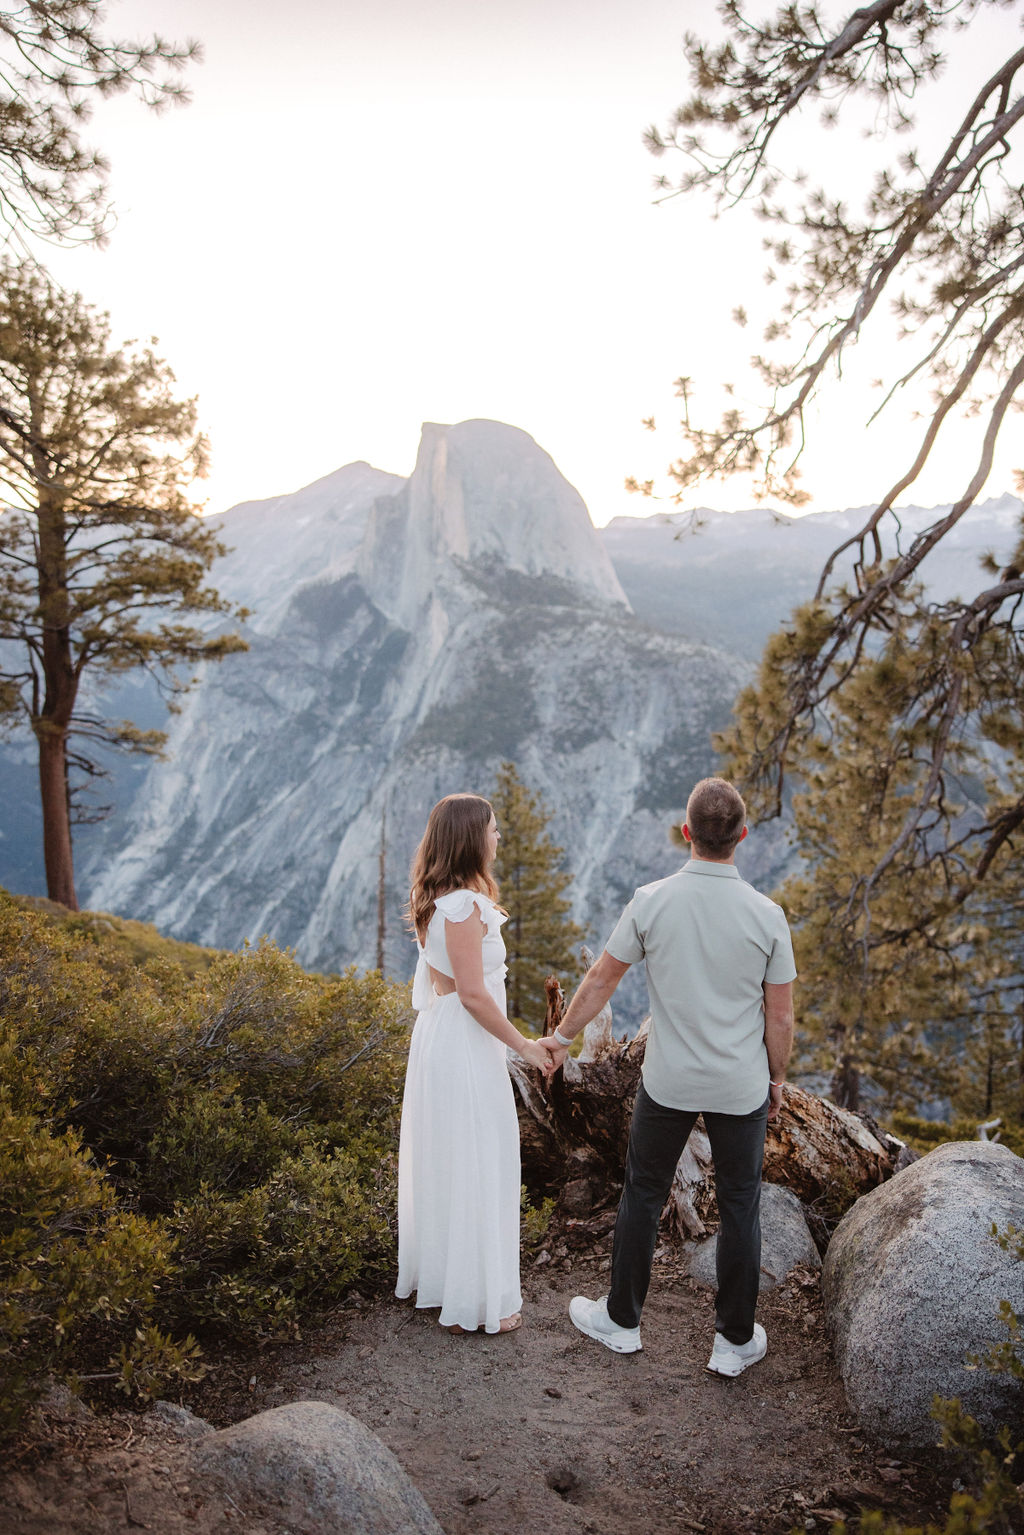 A couple stands embracing amidst trees, with a mountain range featuring a prominent rock formation in the background during their Glacier Point engagement photos